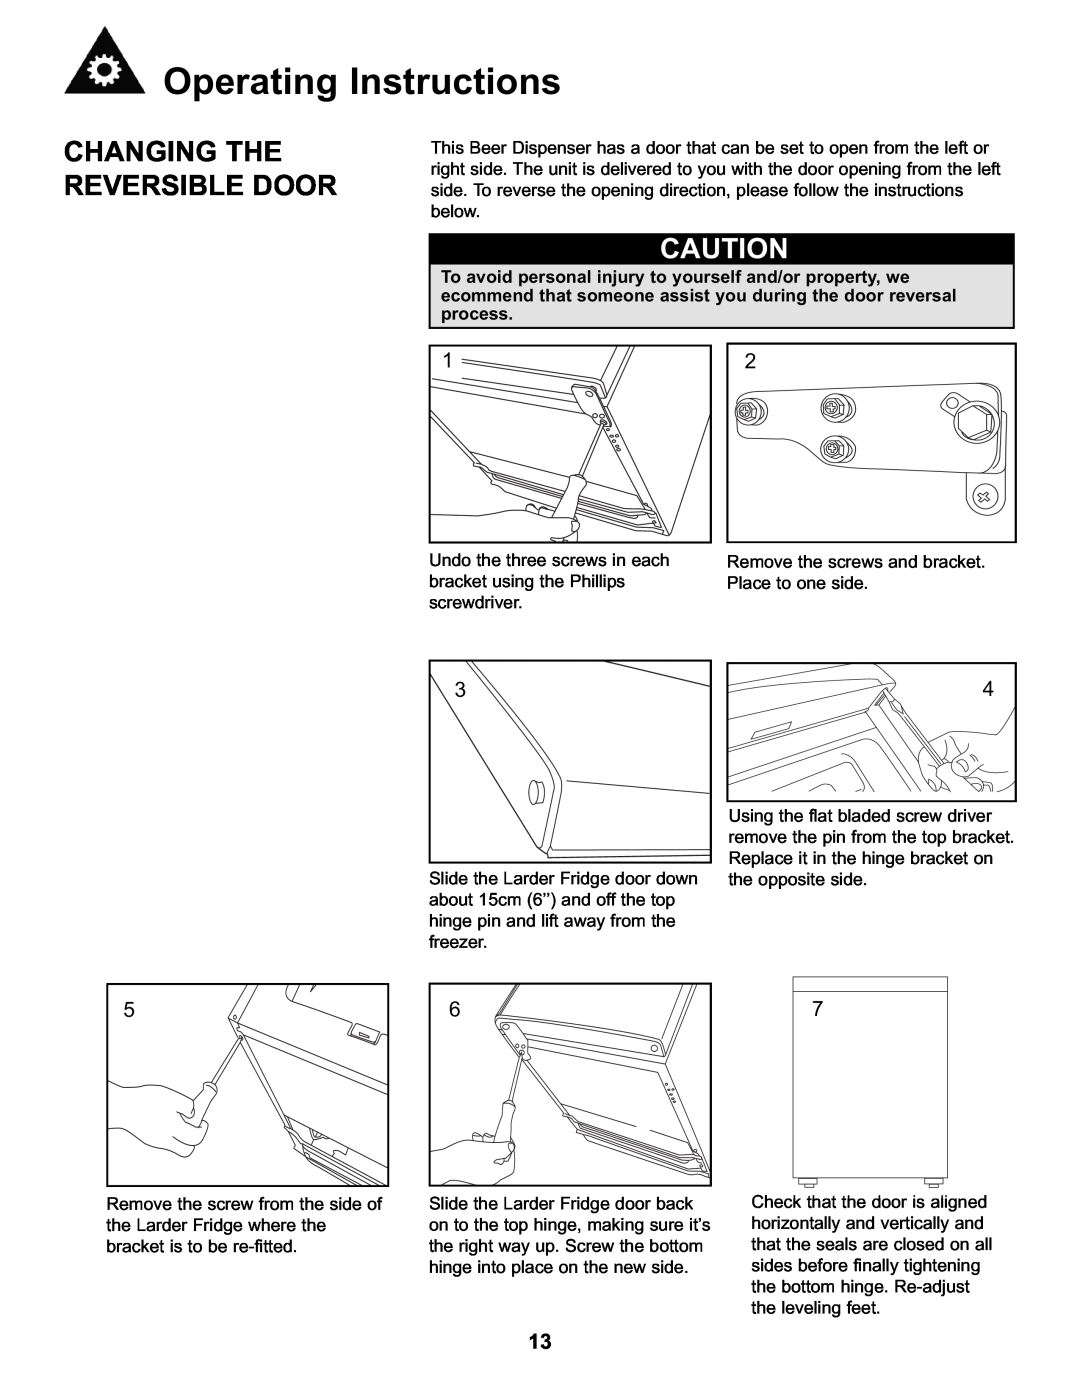 Danby DKC146SLDB manual Changing The Reversible Door, Operating Instructions 